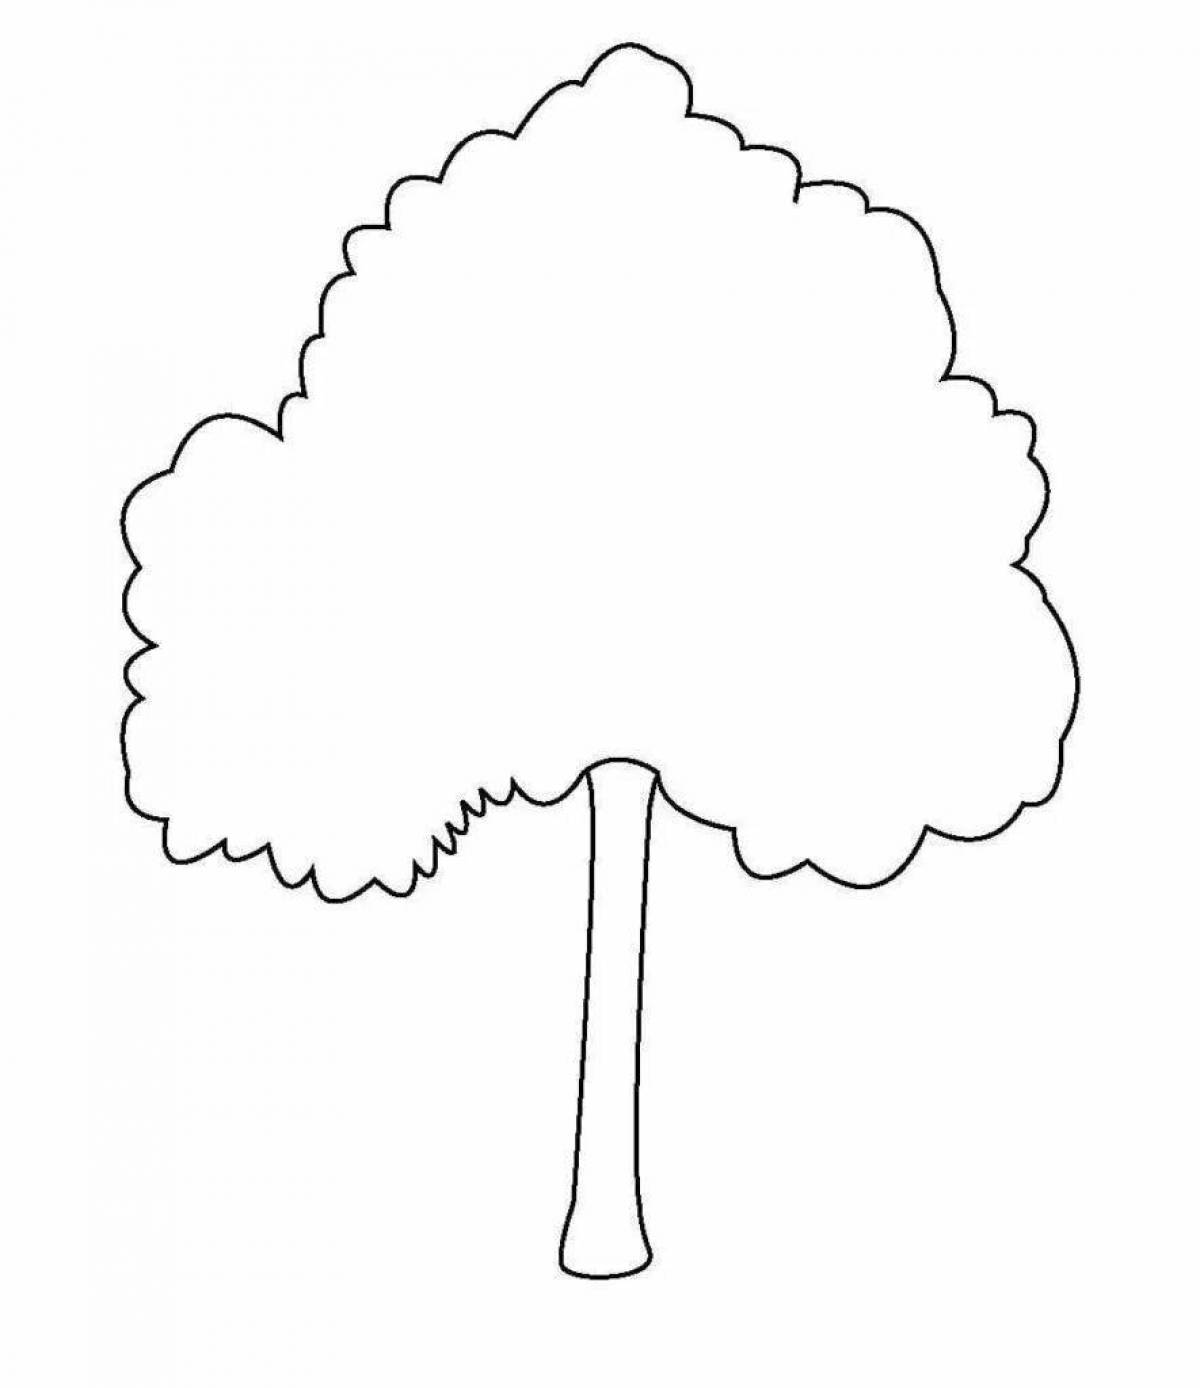 Whimsical winter tree coloring book for 3-4 year olds